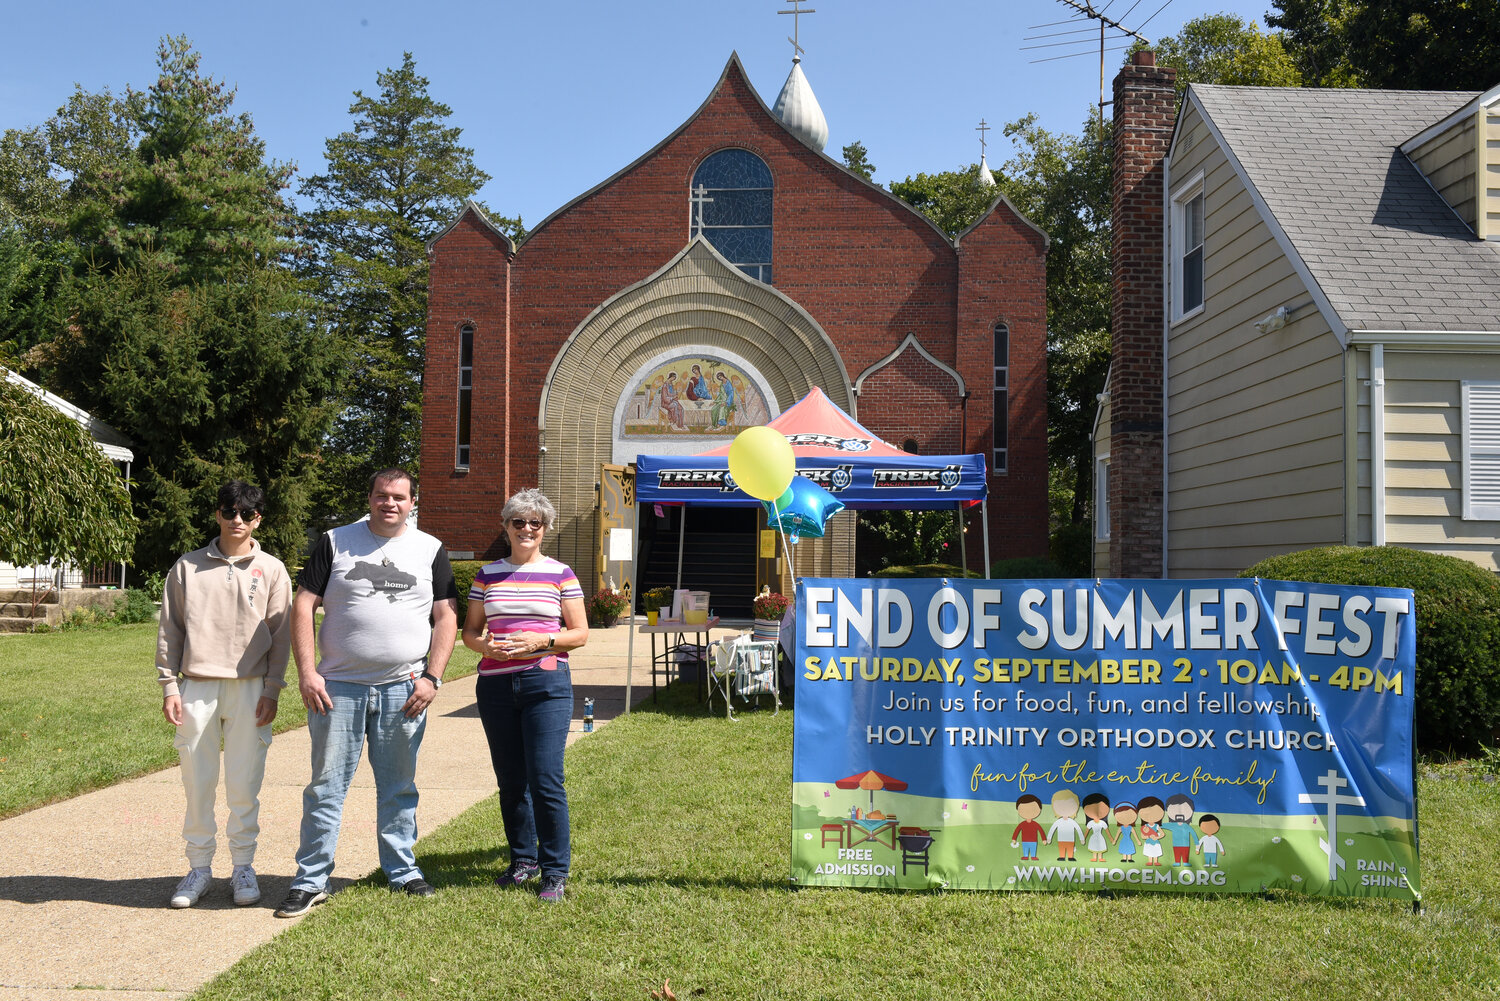 The church, located on Green Avenue, is among the oldest Orthodox Christian establishments on Long Island. Kathy LaBella, Alexander Eagen and Jonathan Zabierowski in front of the church.